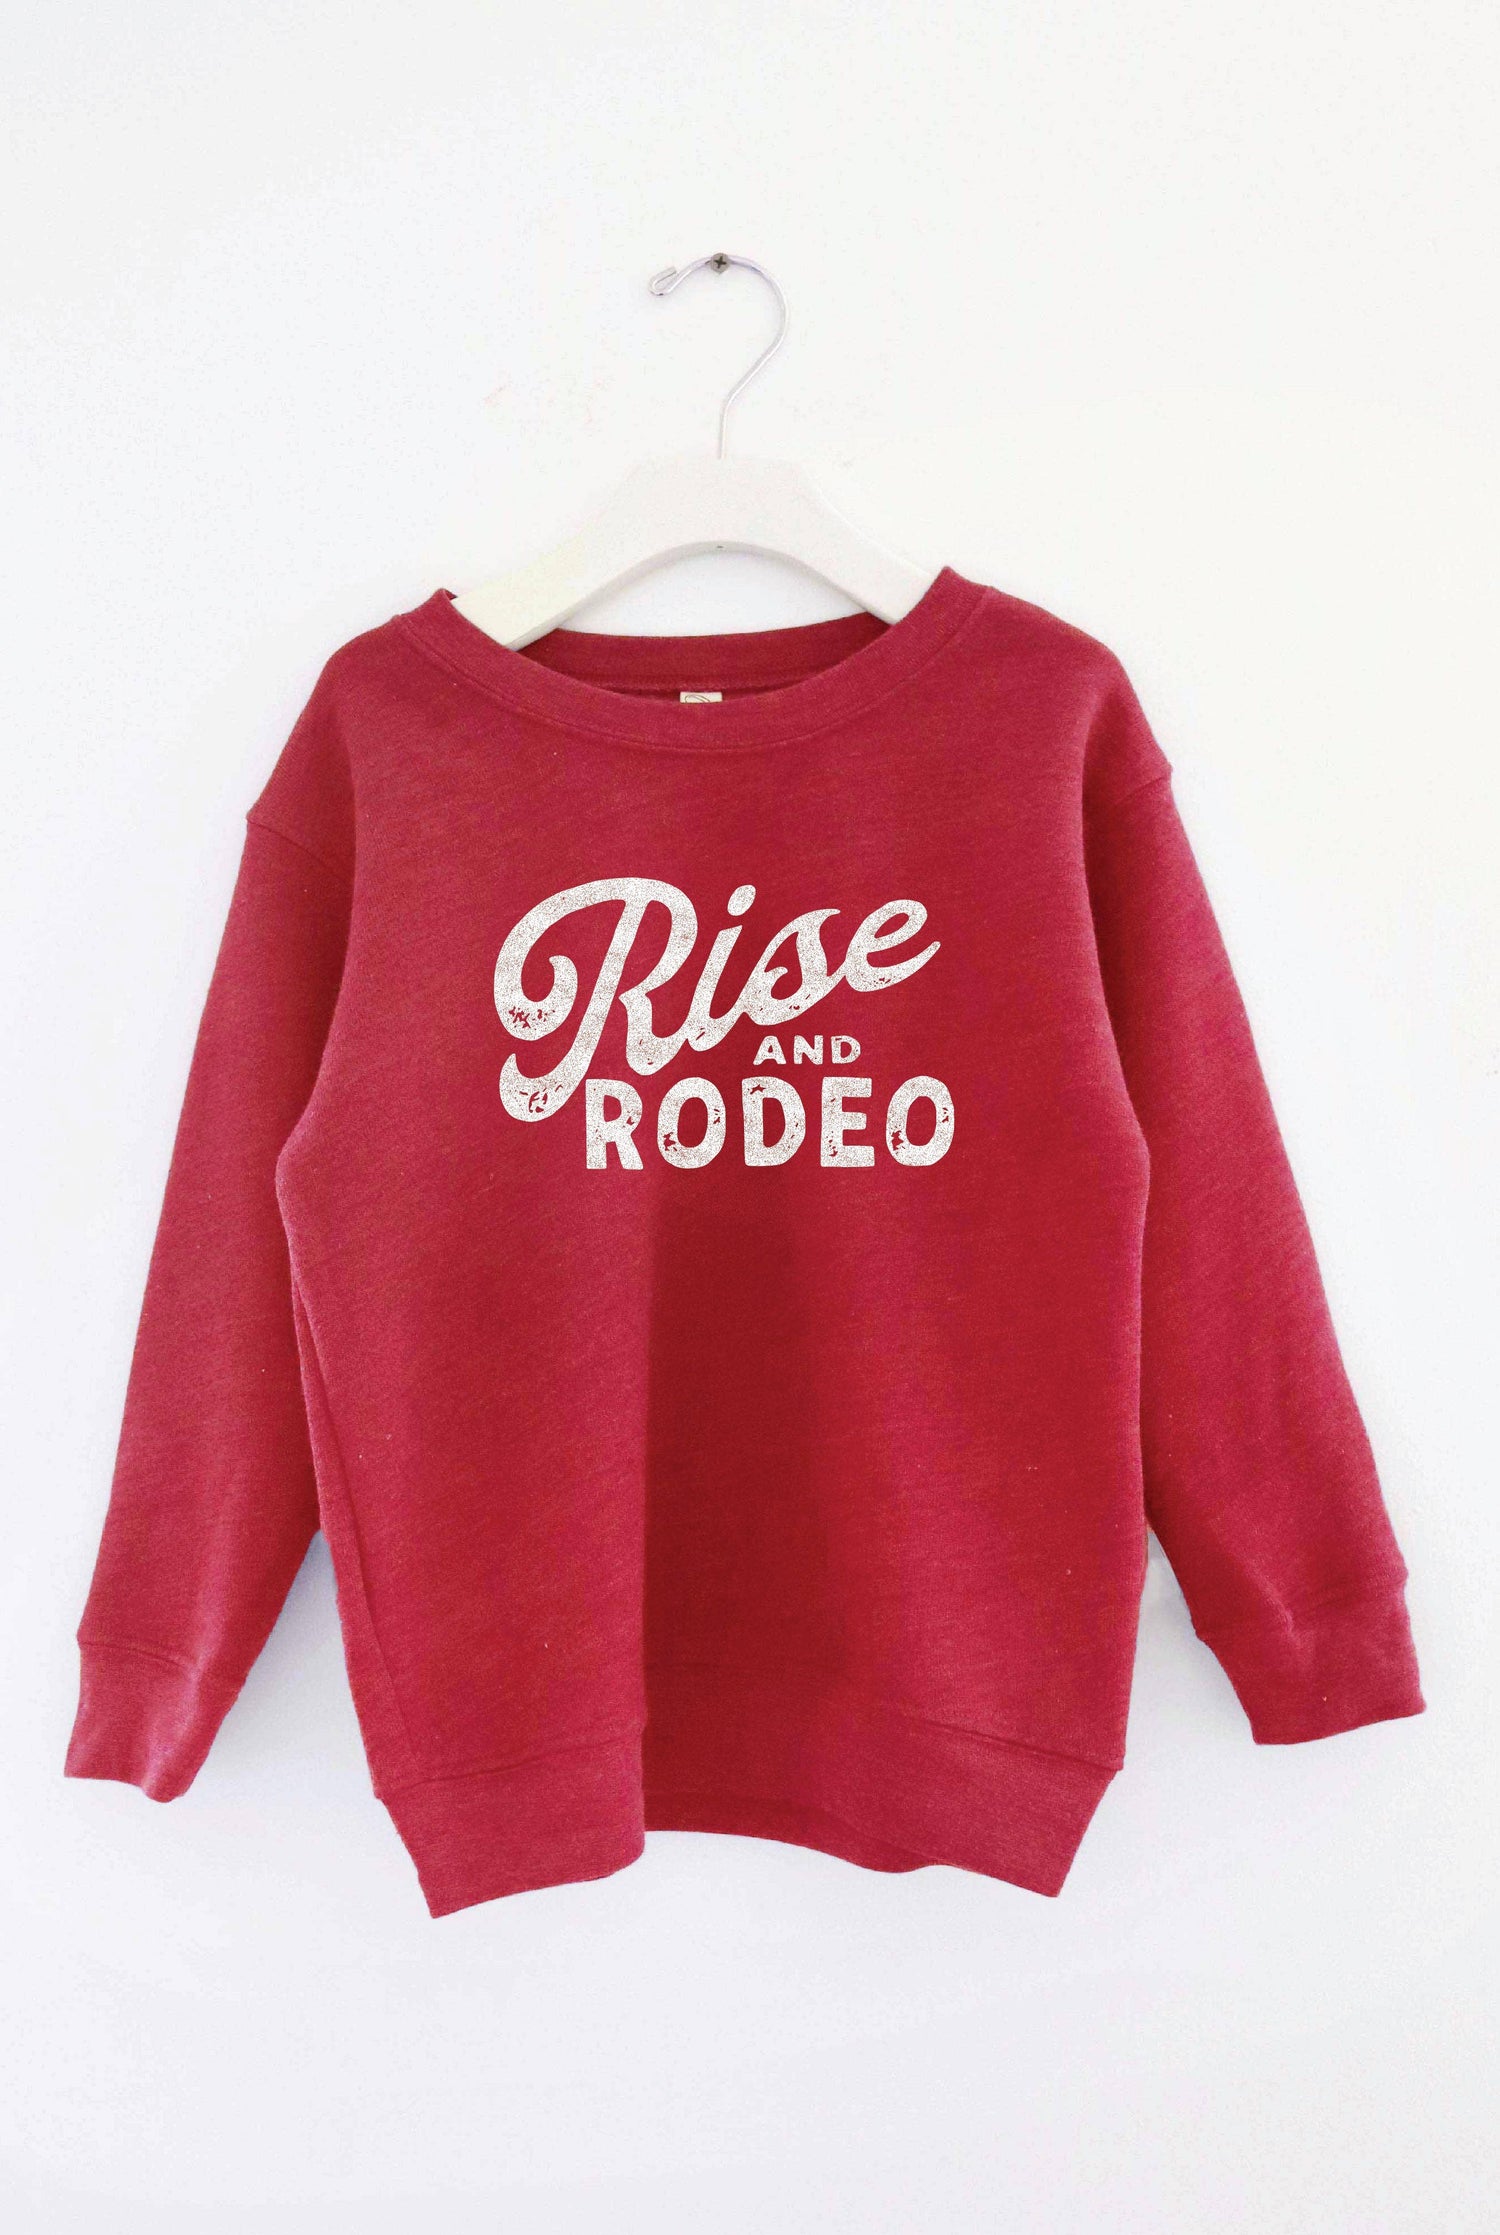 Rise and Rodeo Toddler Sweatshirt